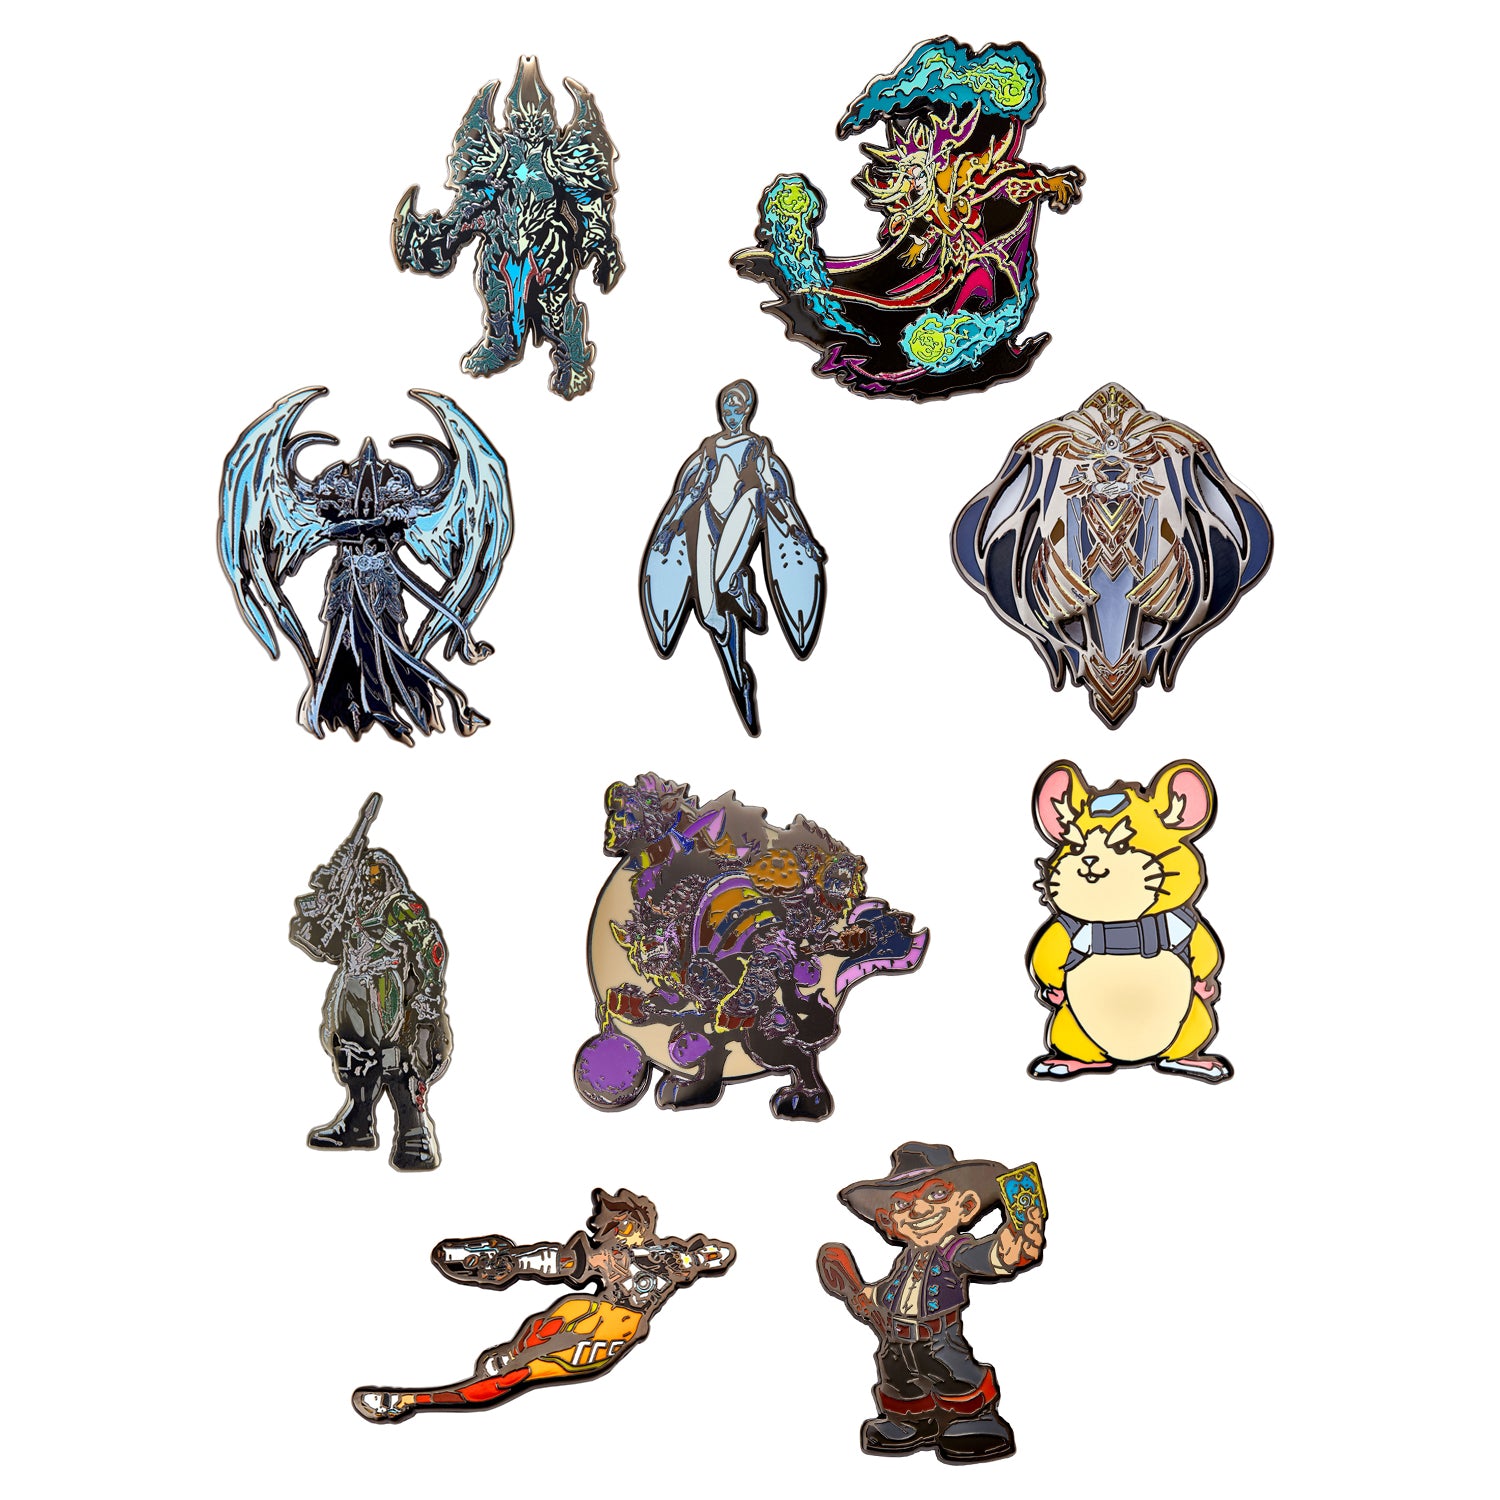 All the pins of the Blizzard Series 9 Individual Blind Pin Pack